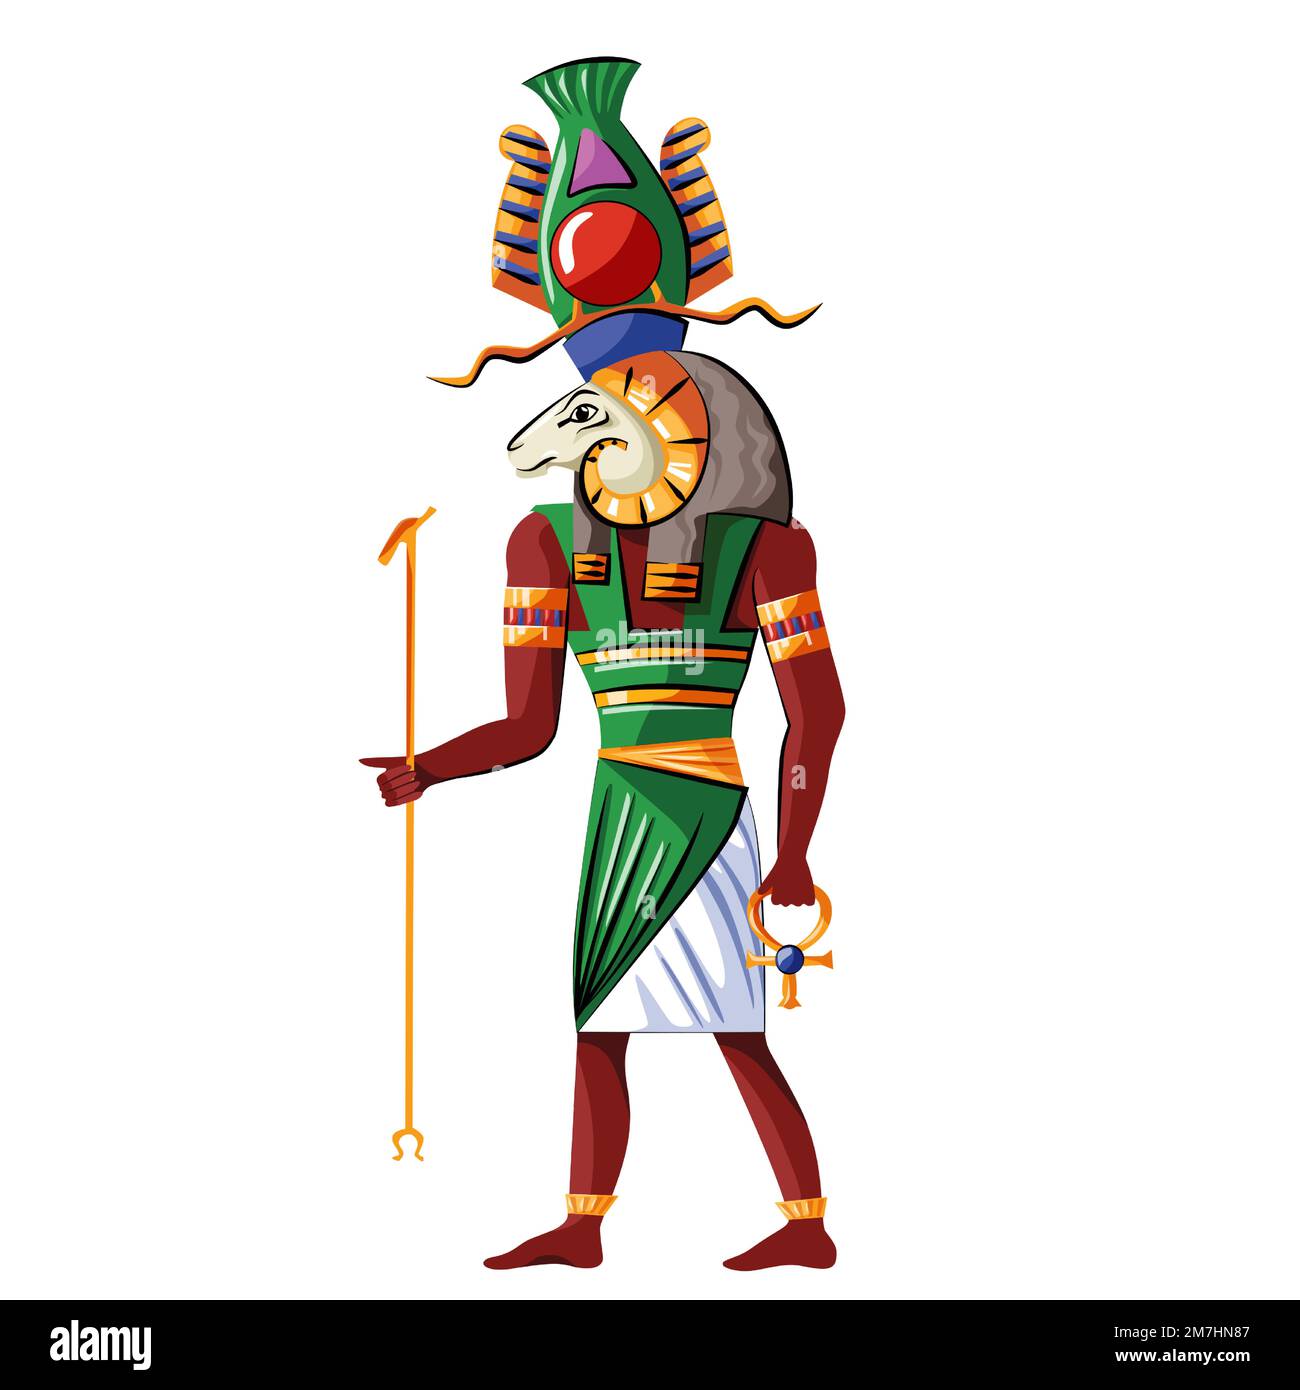 Ancient Egypt god source of Nile Khnum cartoon vector. Egyptian culture religious symbol, creator god with human figure and ram head with spiral-twisted horns and sacred symbols in his hands Stock Vector